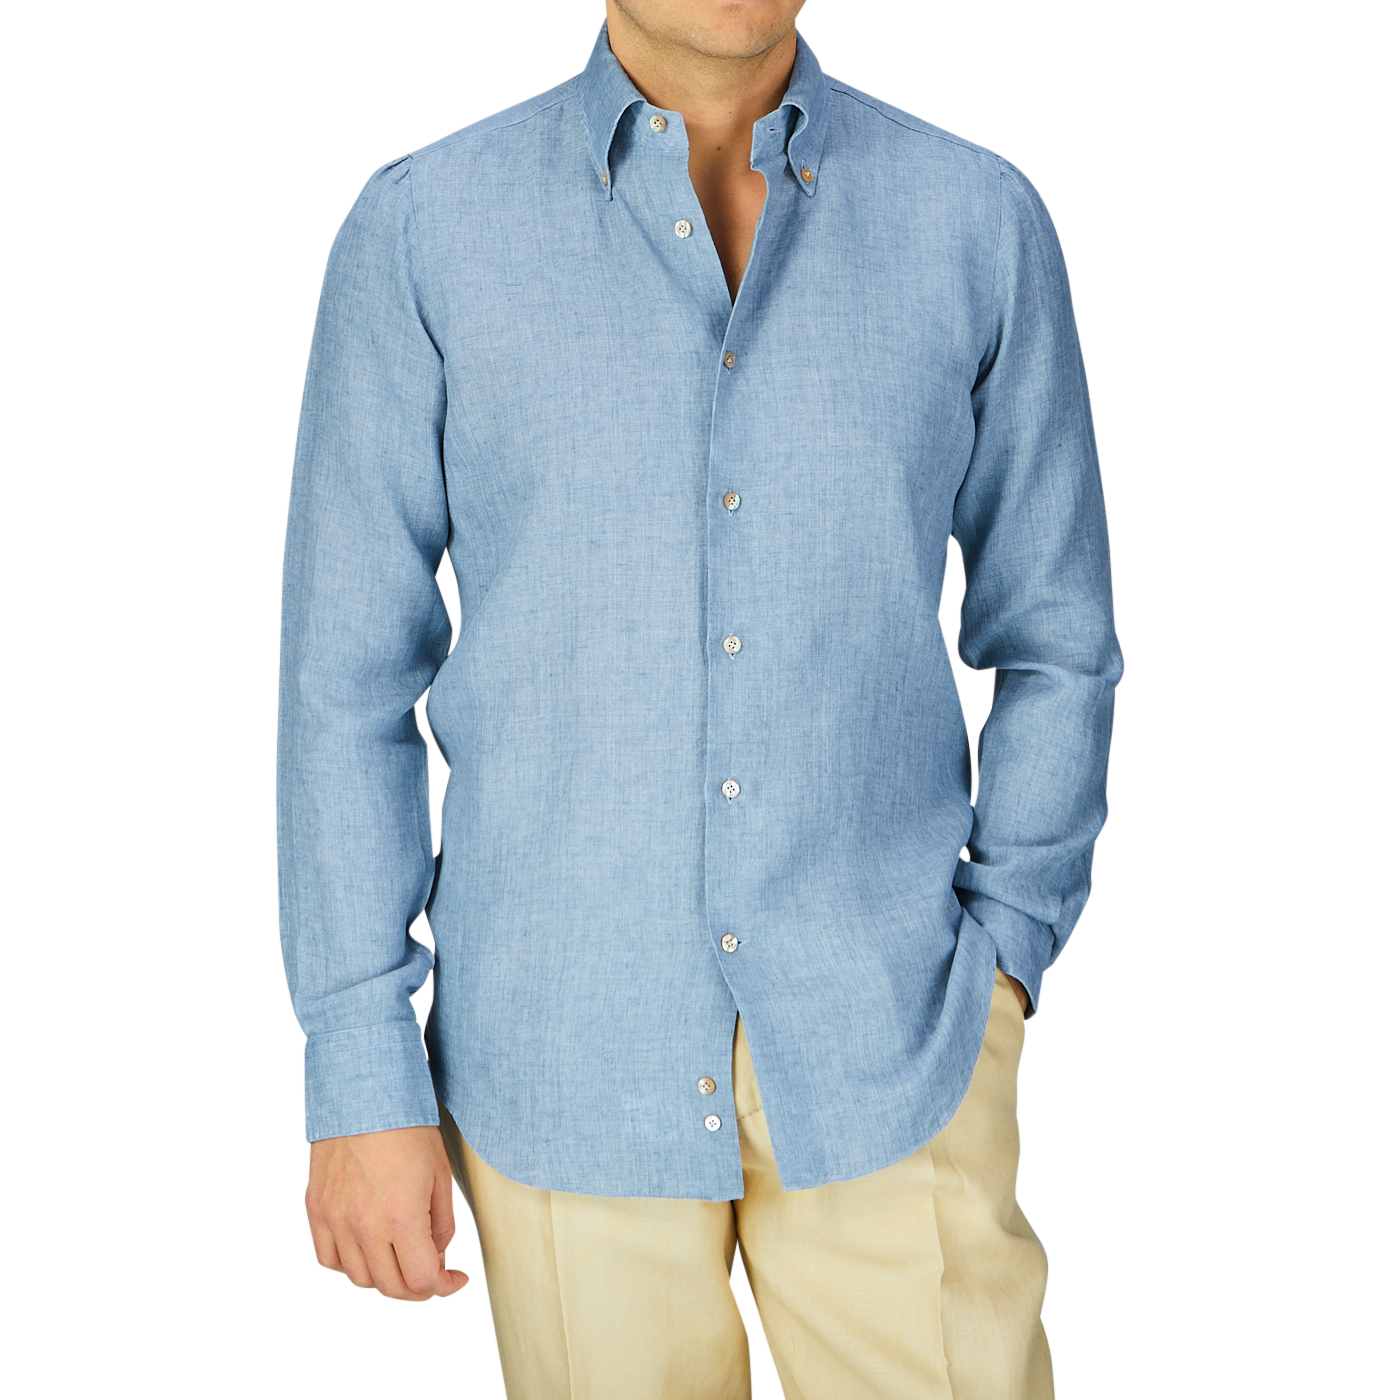 Man in a Mazzarelli Denim Blue Washed Linen BD Slim Shirt and beige pants.